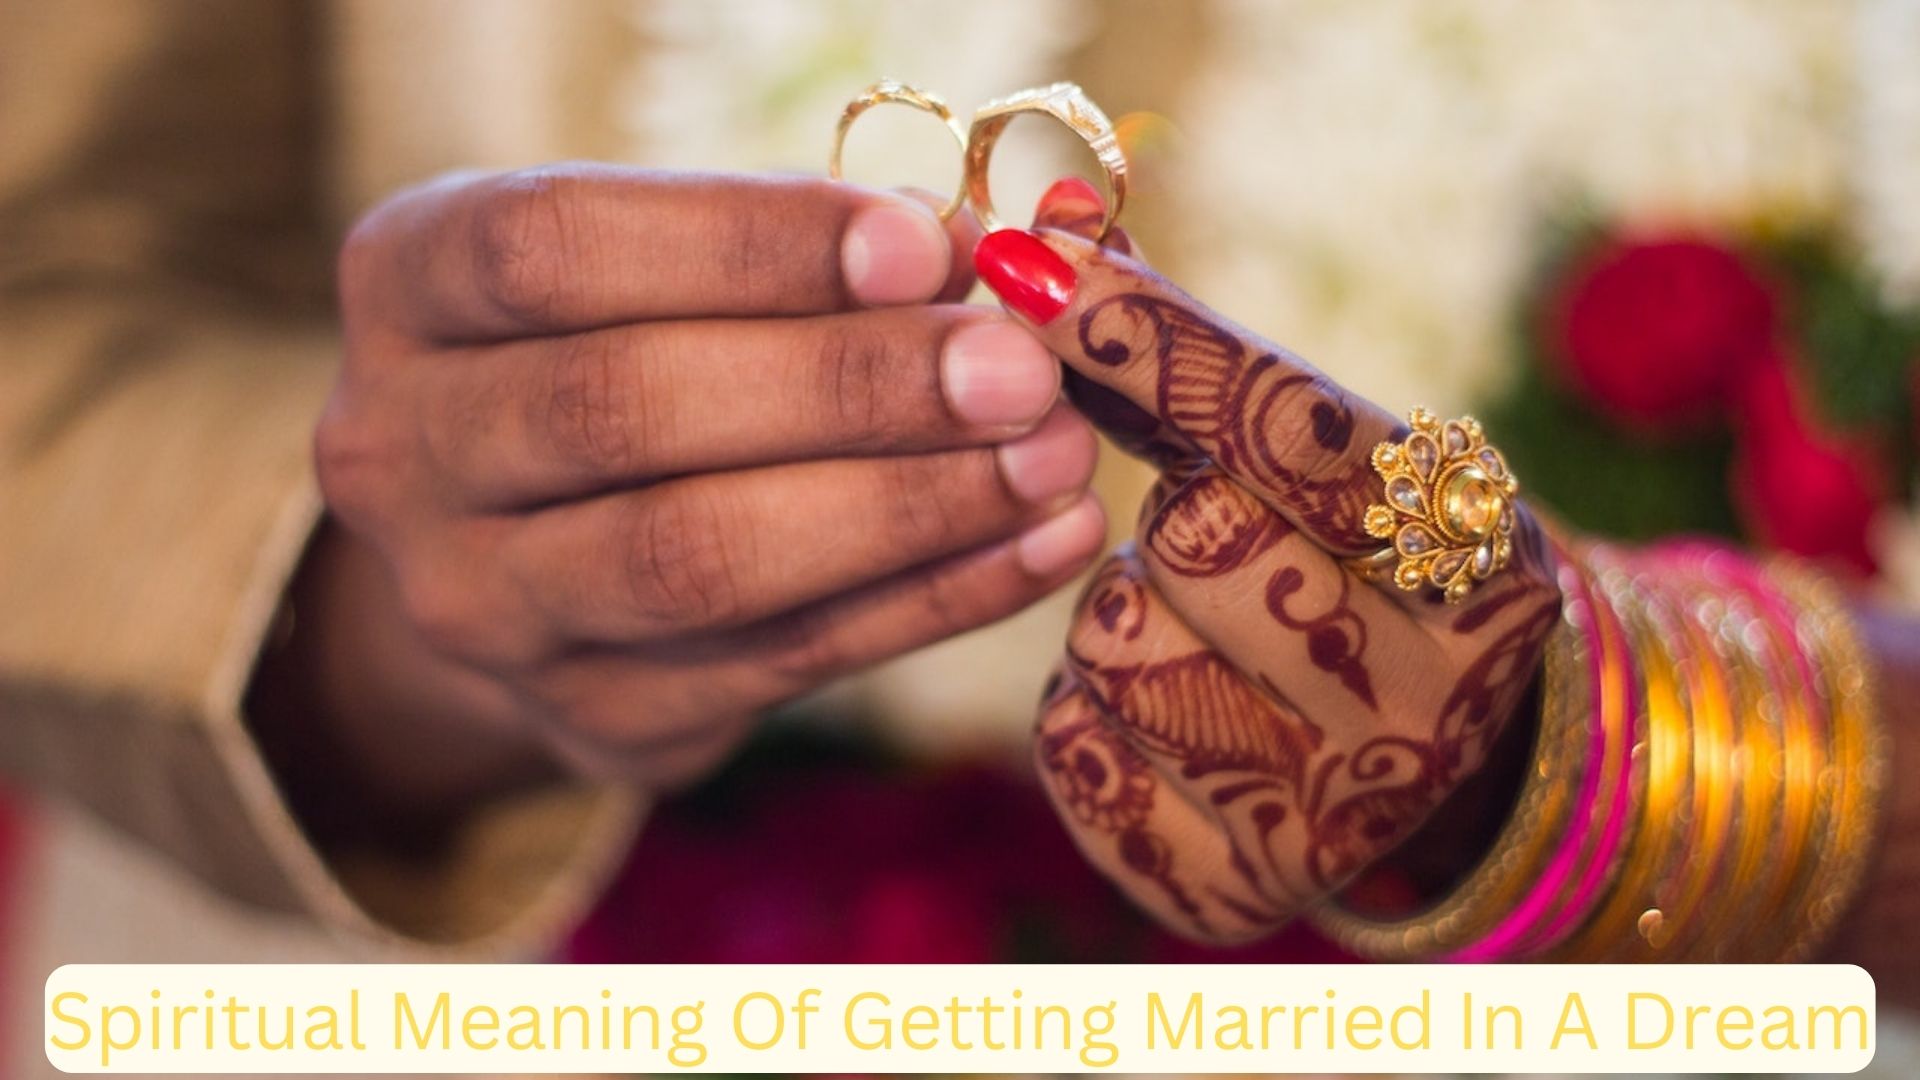 Spiritual Meaning Of Getting Married In A Dream